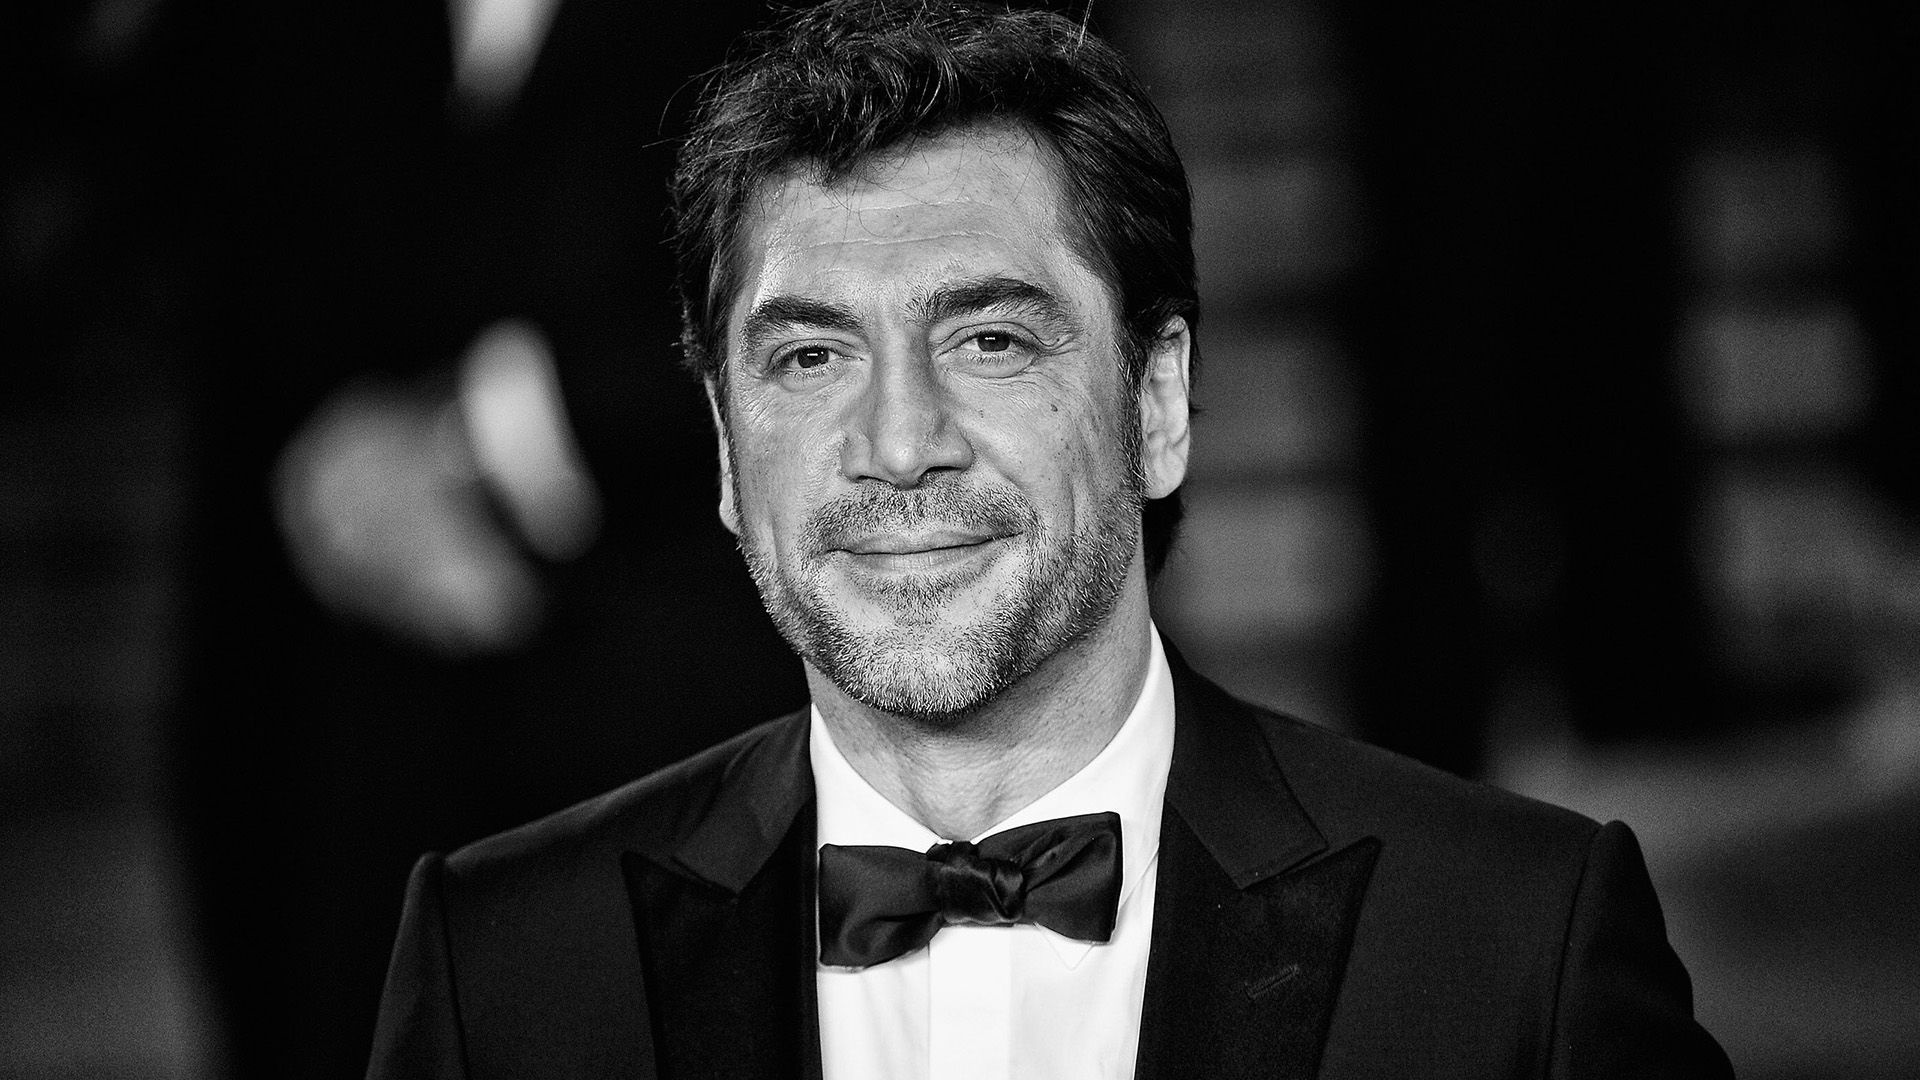 Javier Bardem movies, Top free backgrounds, Spanish actor, Hollywood, 1920x1080 Full HD Desktop